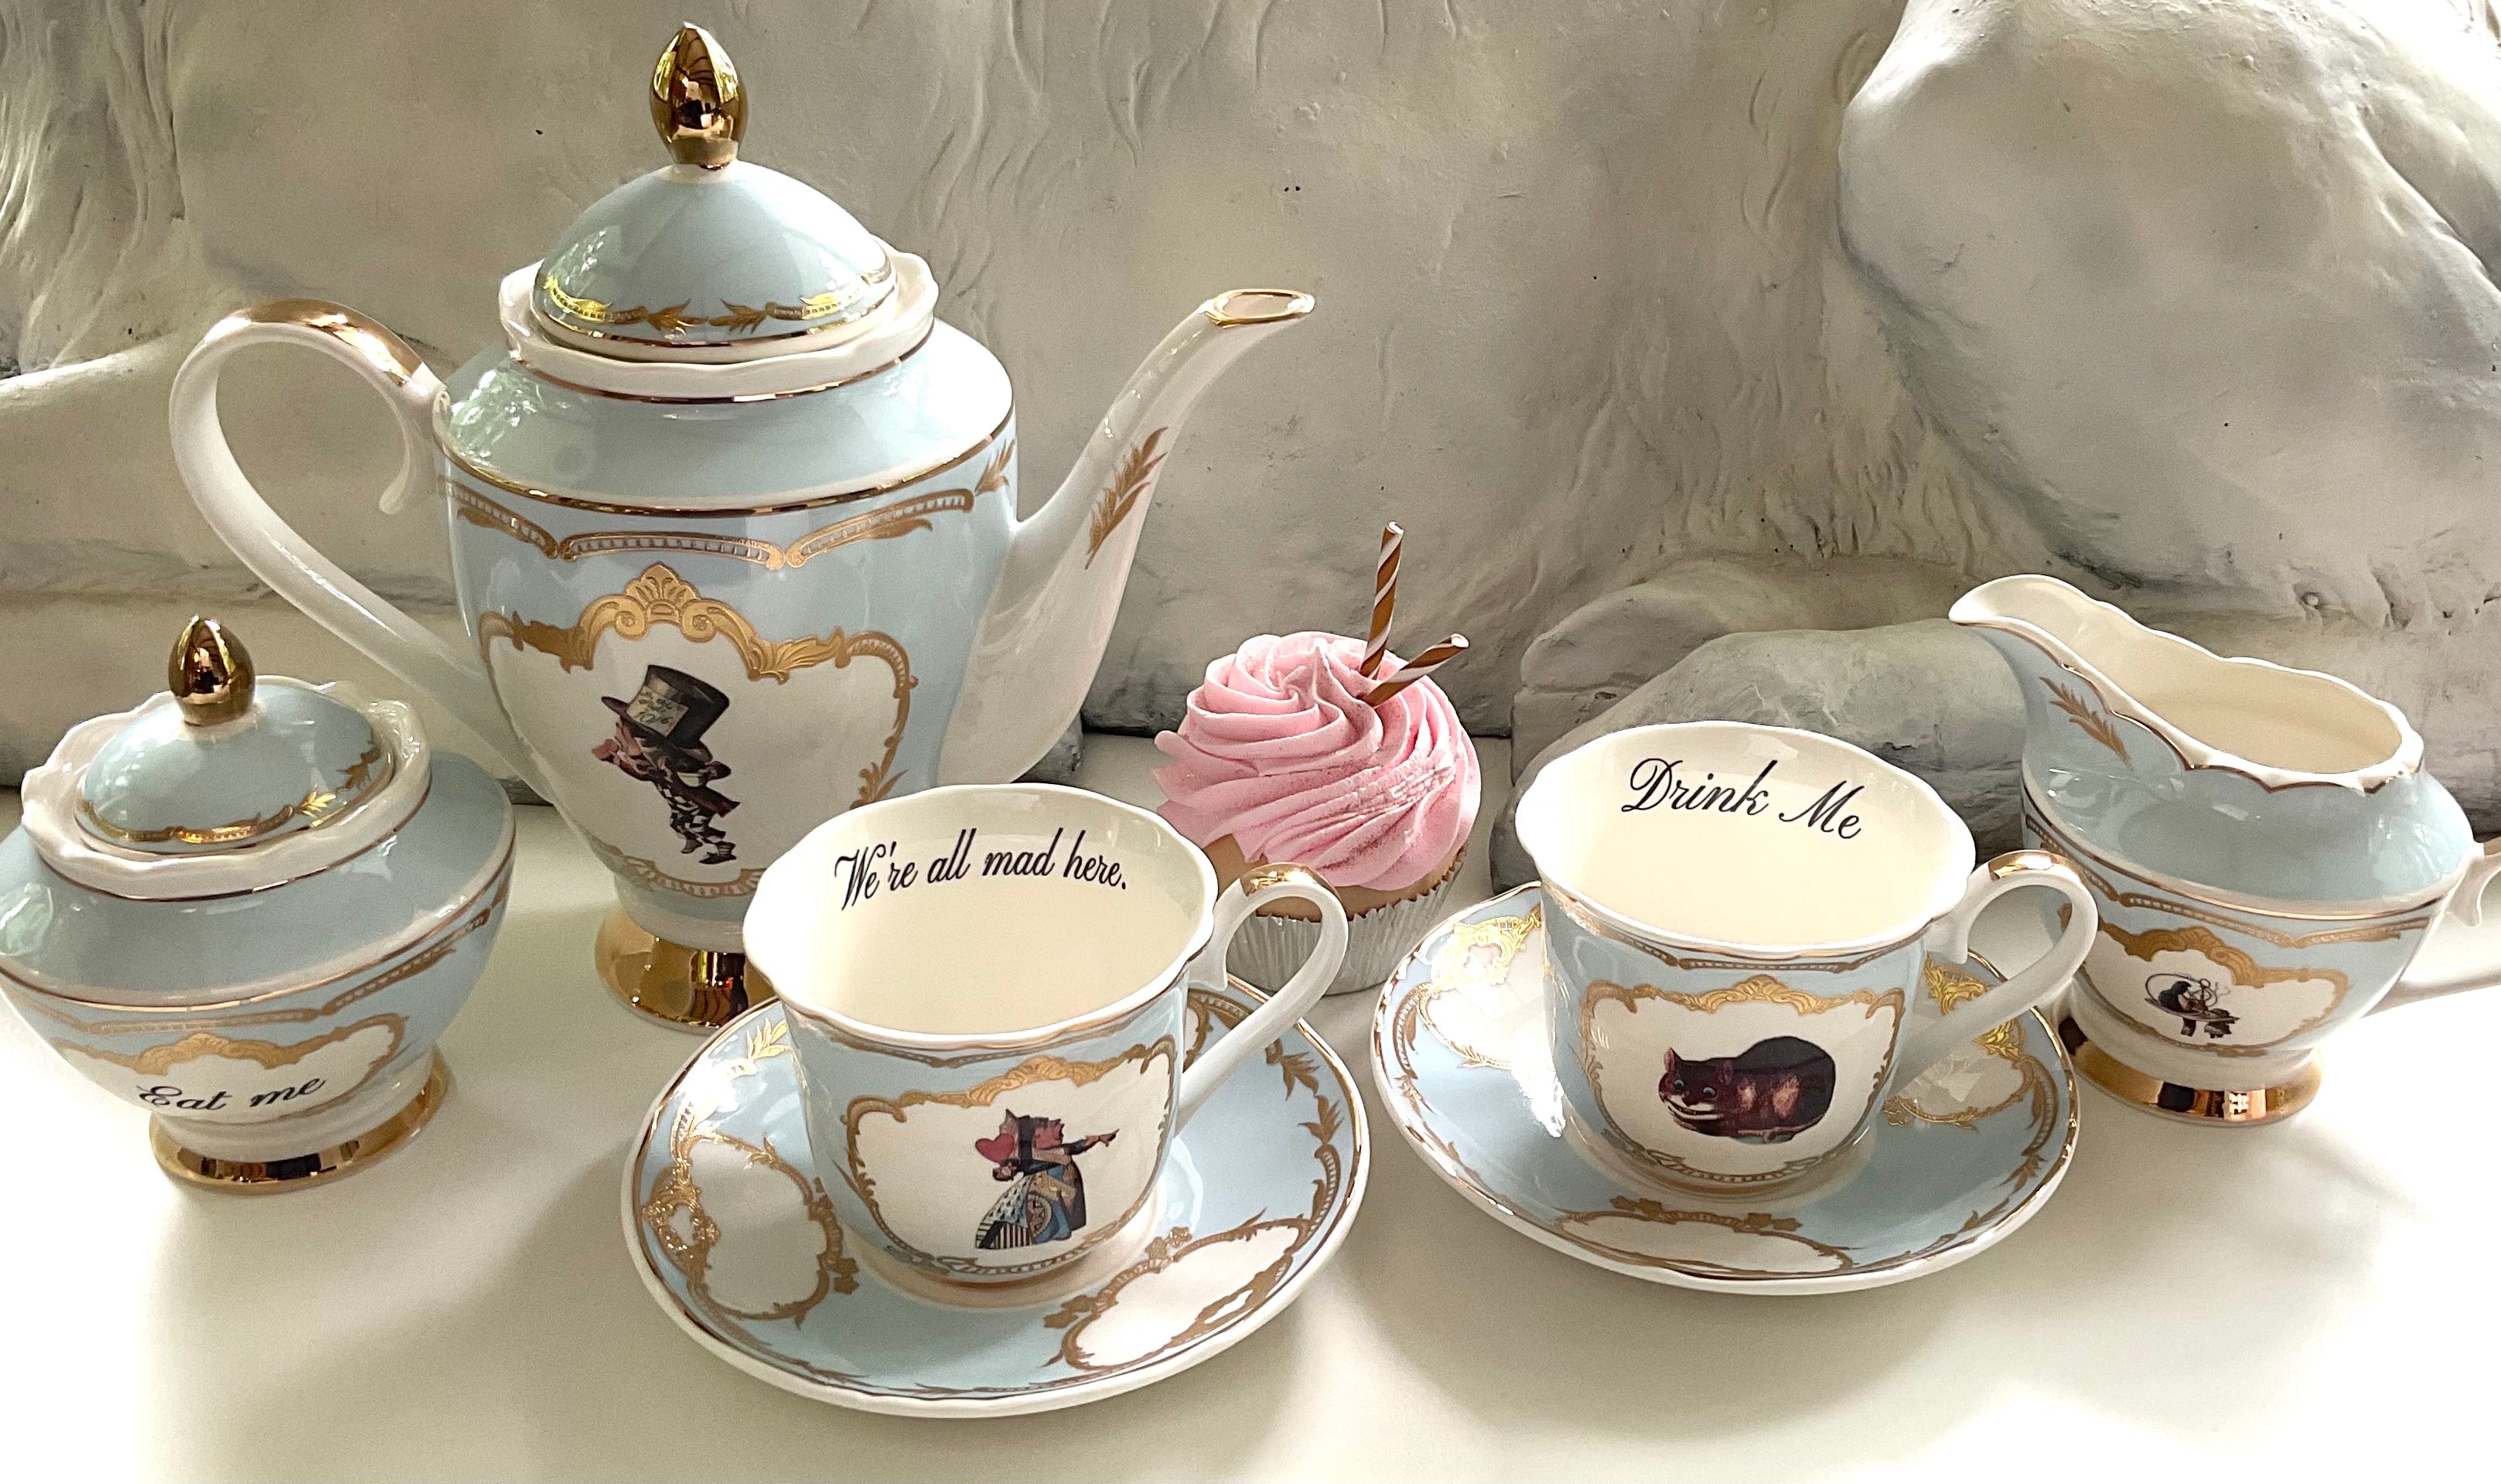 Whimsical Tea Set with Alice in Wonderland